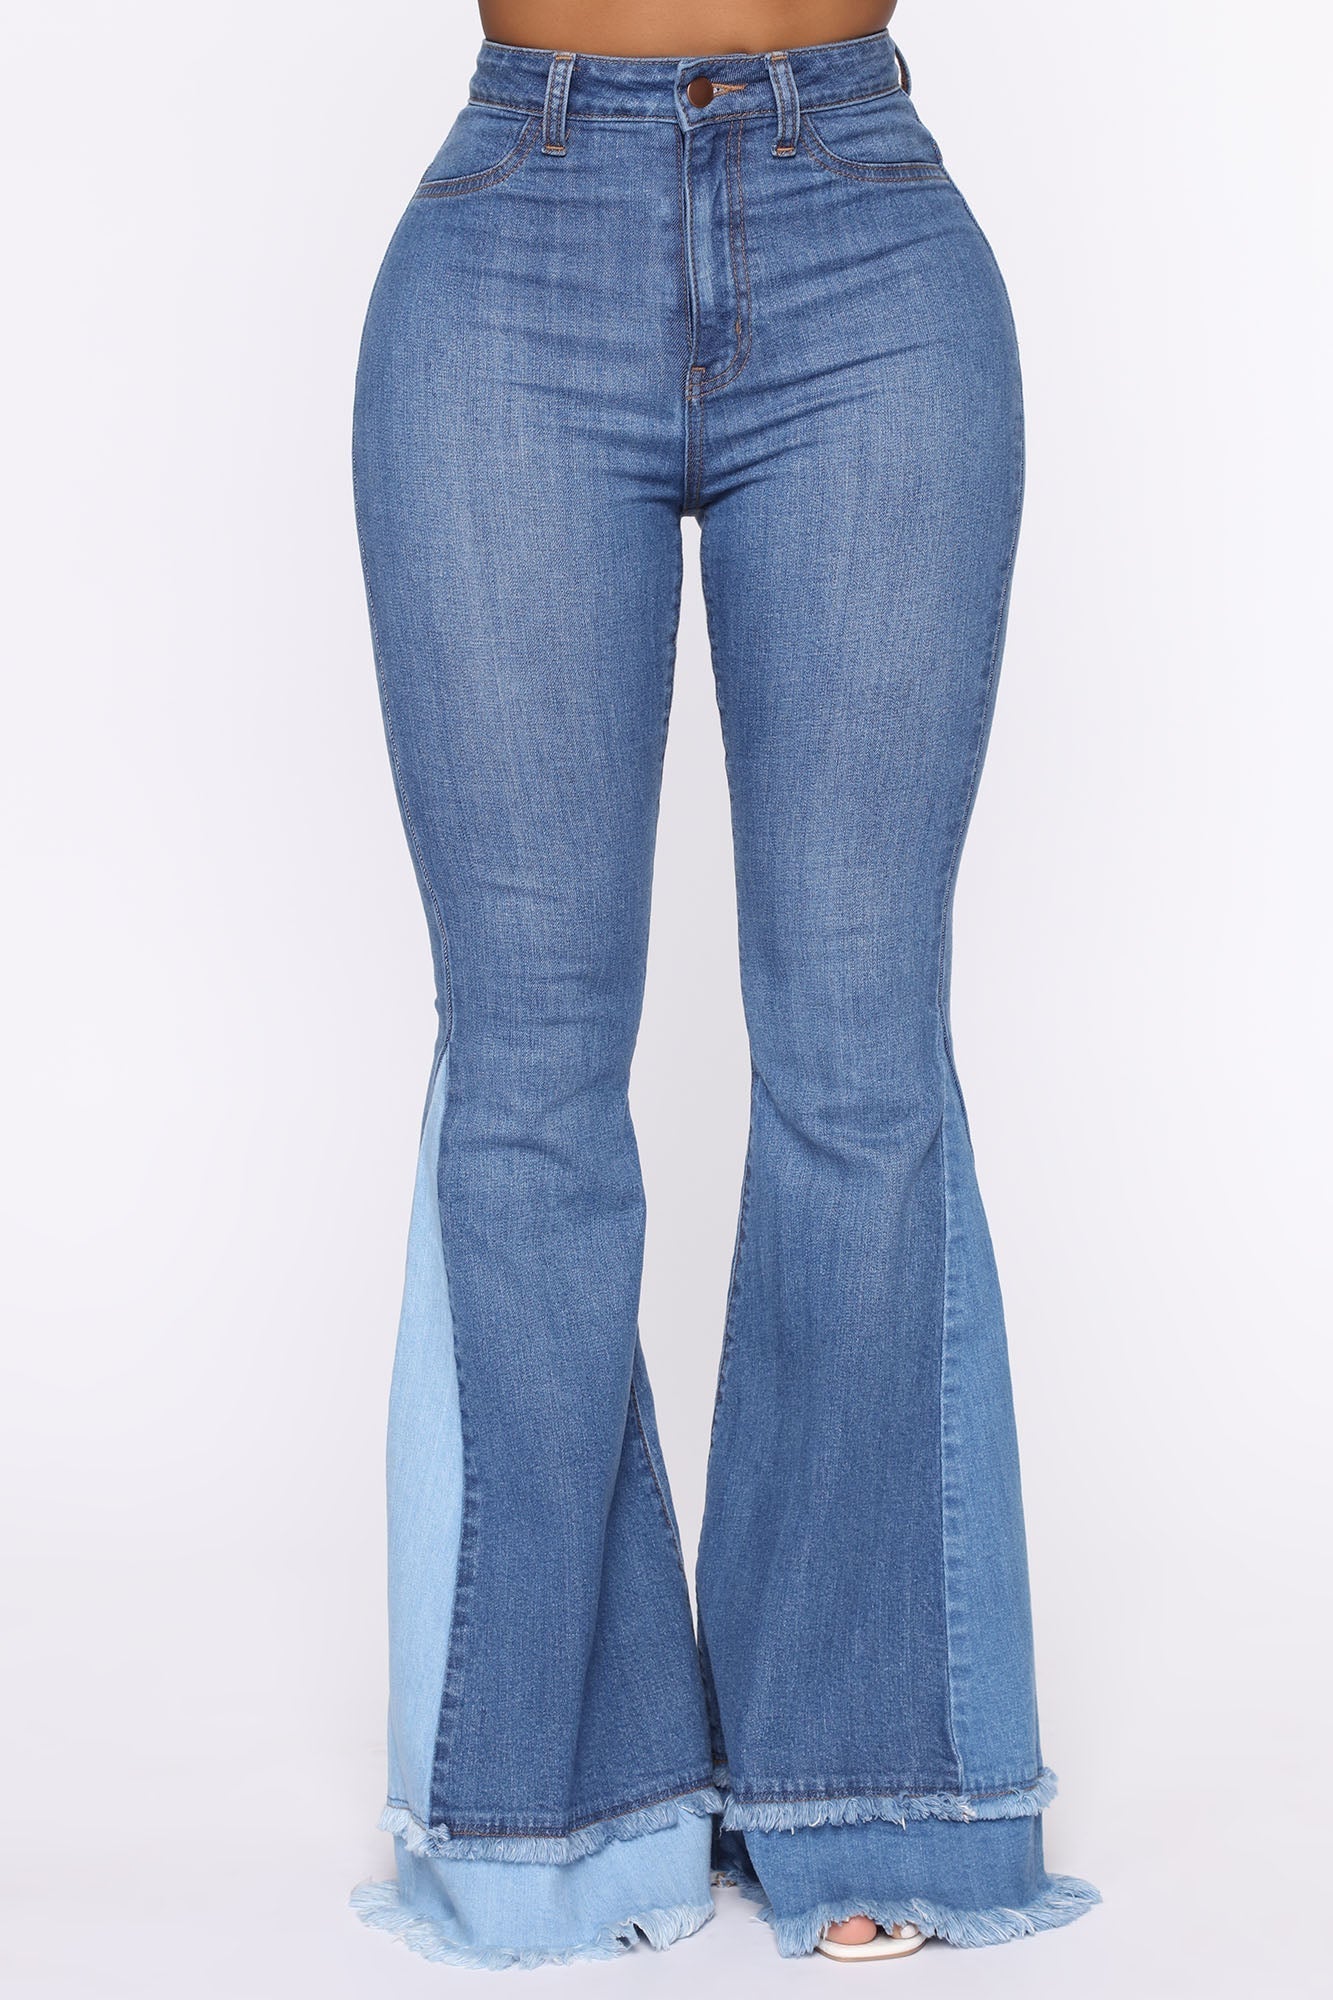 Only The Best Vibes Bell Bottom Jeans - Medium Blue Wash